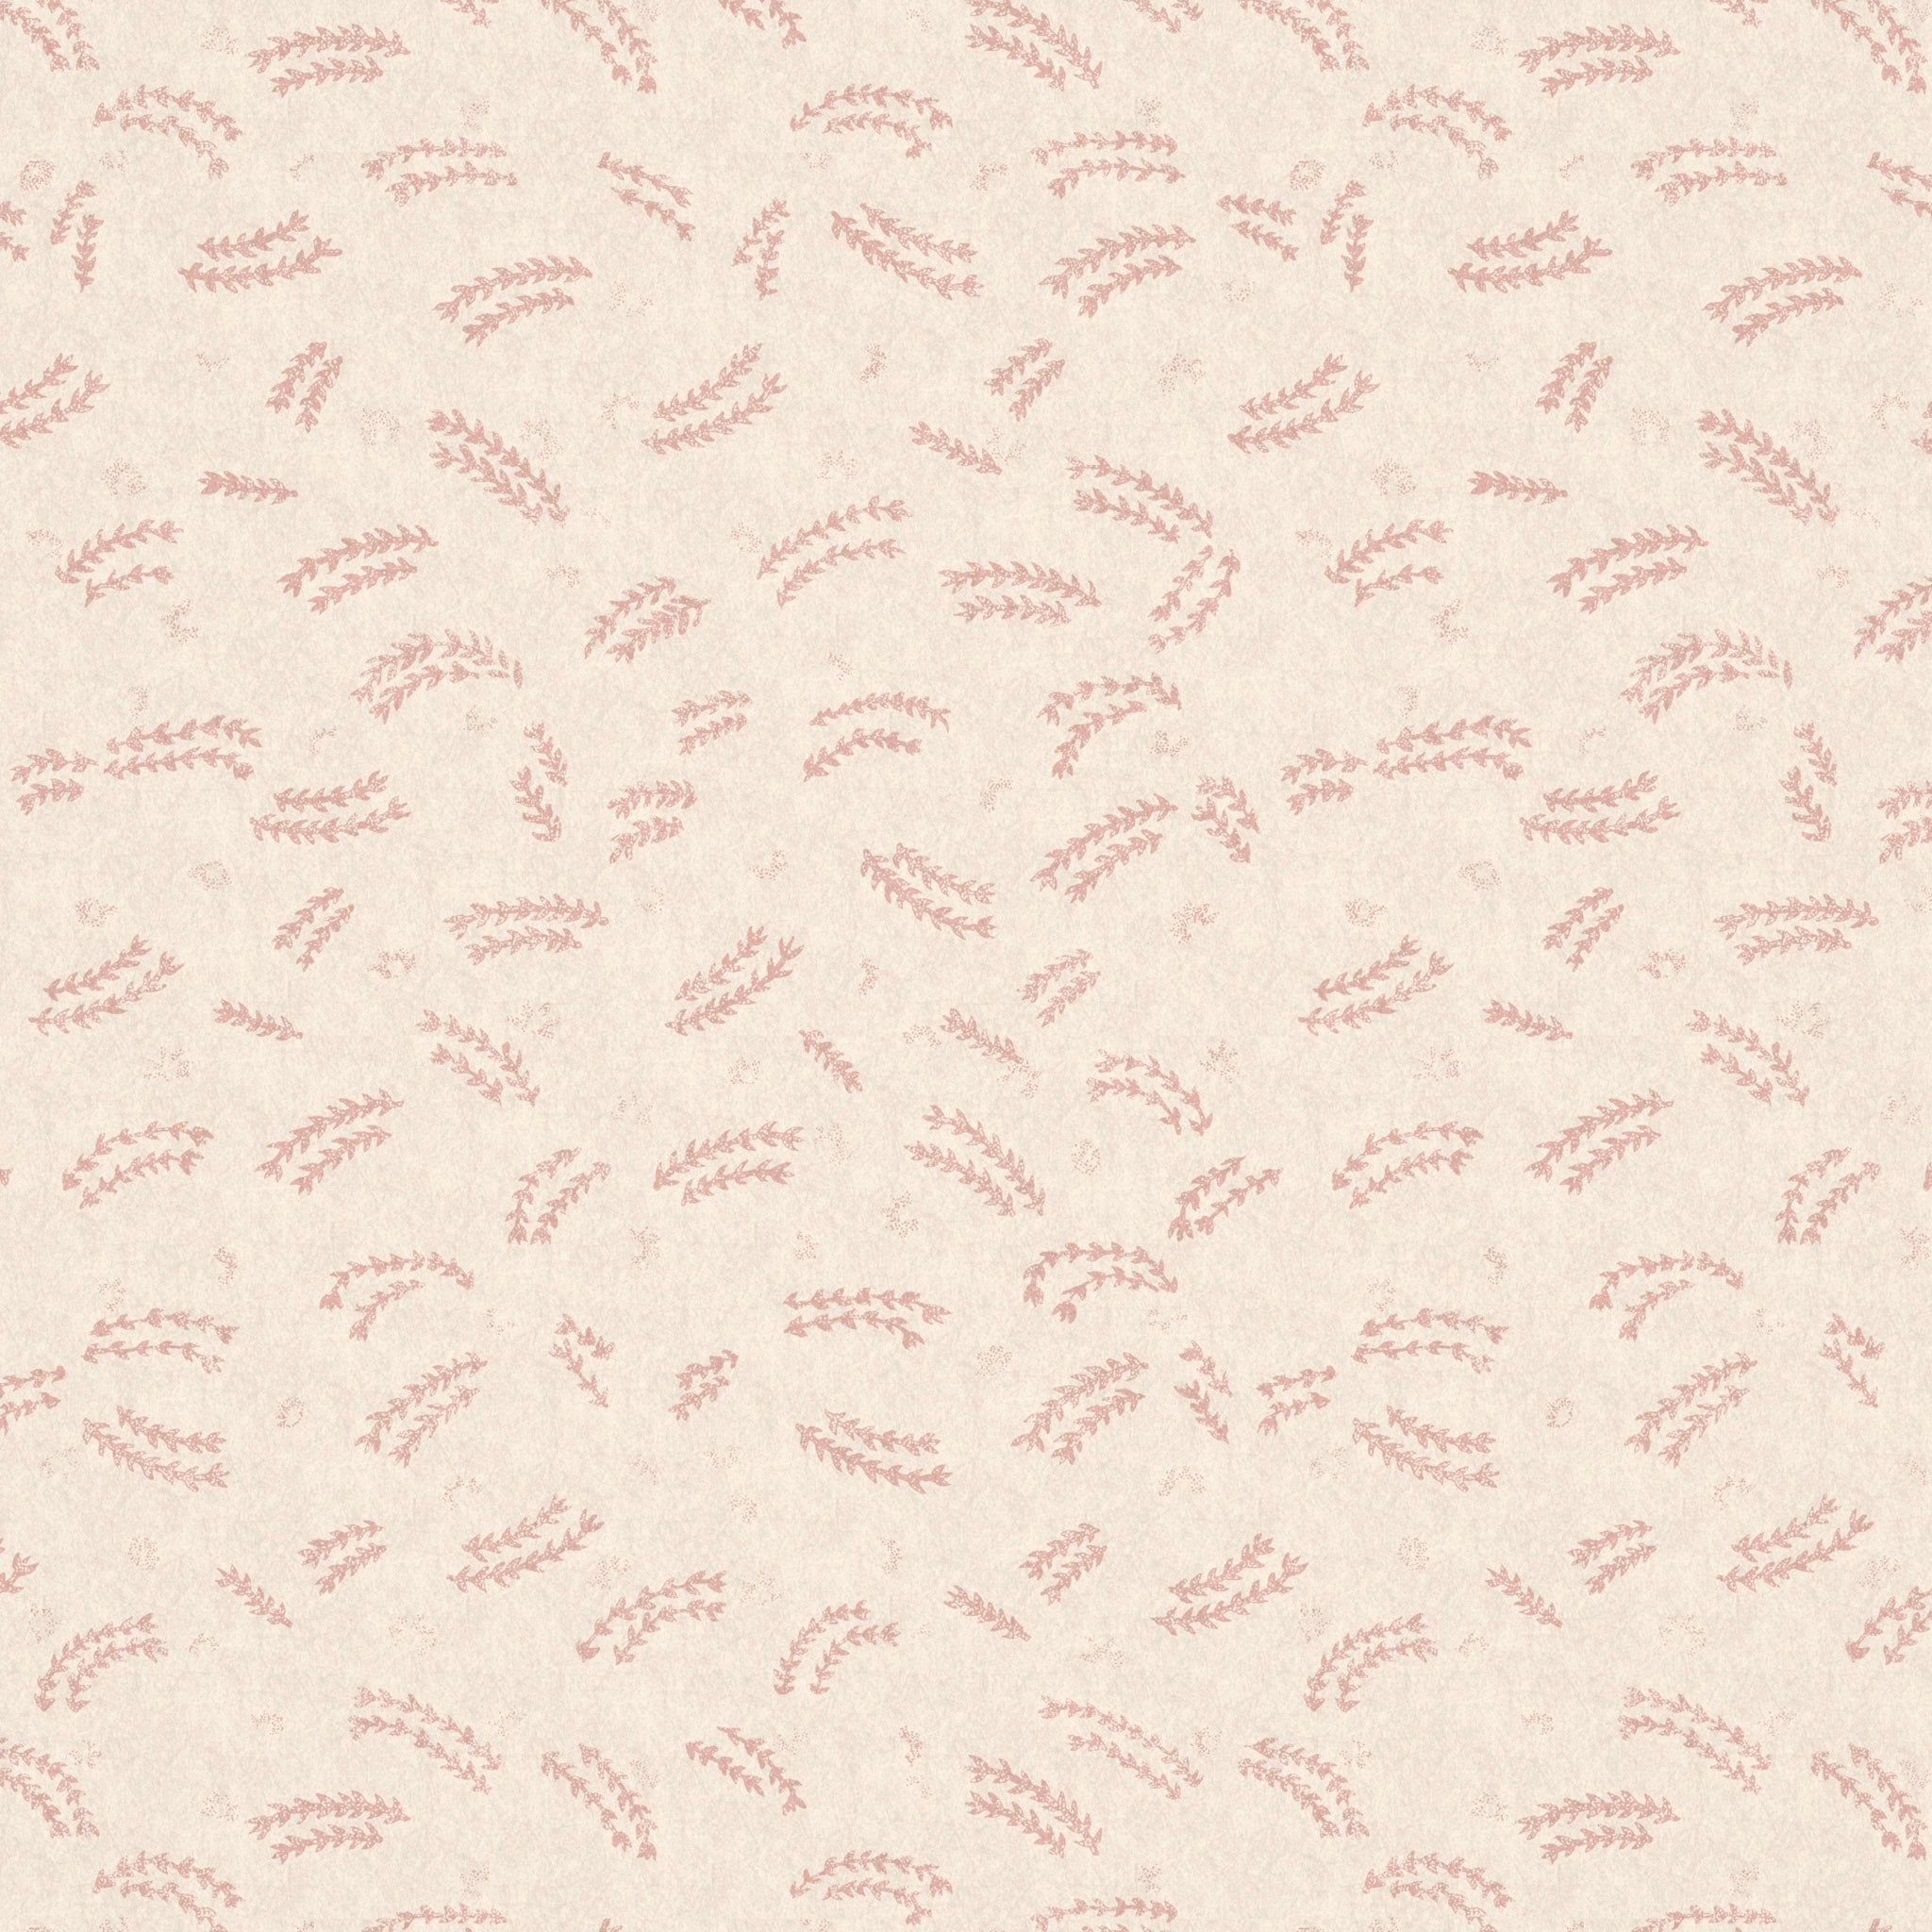 A leafy pattern in a soft pink color on a white background - Light pink